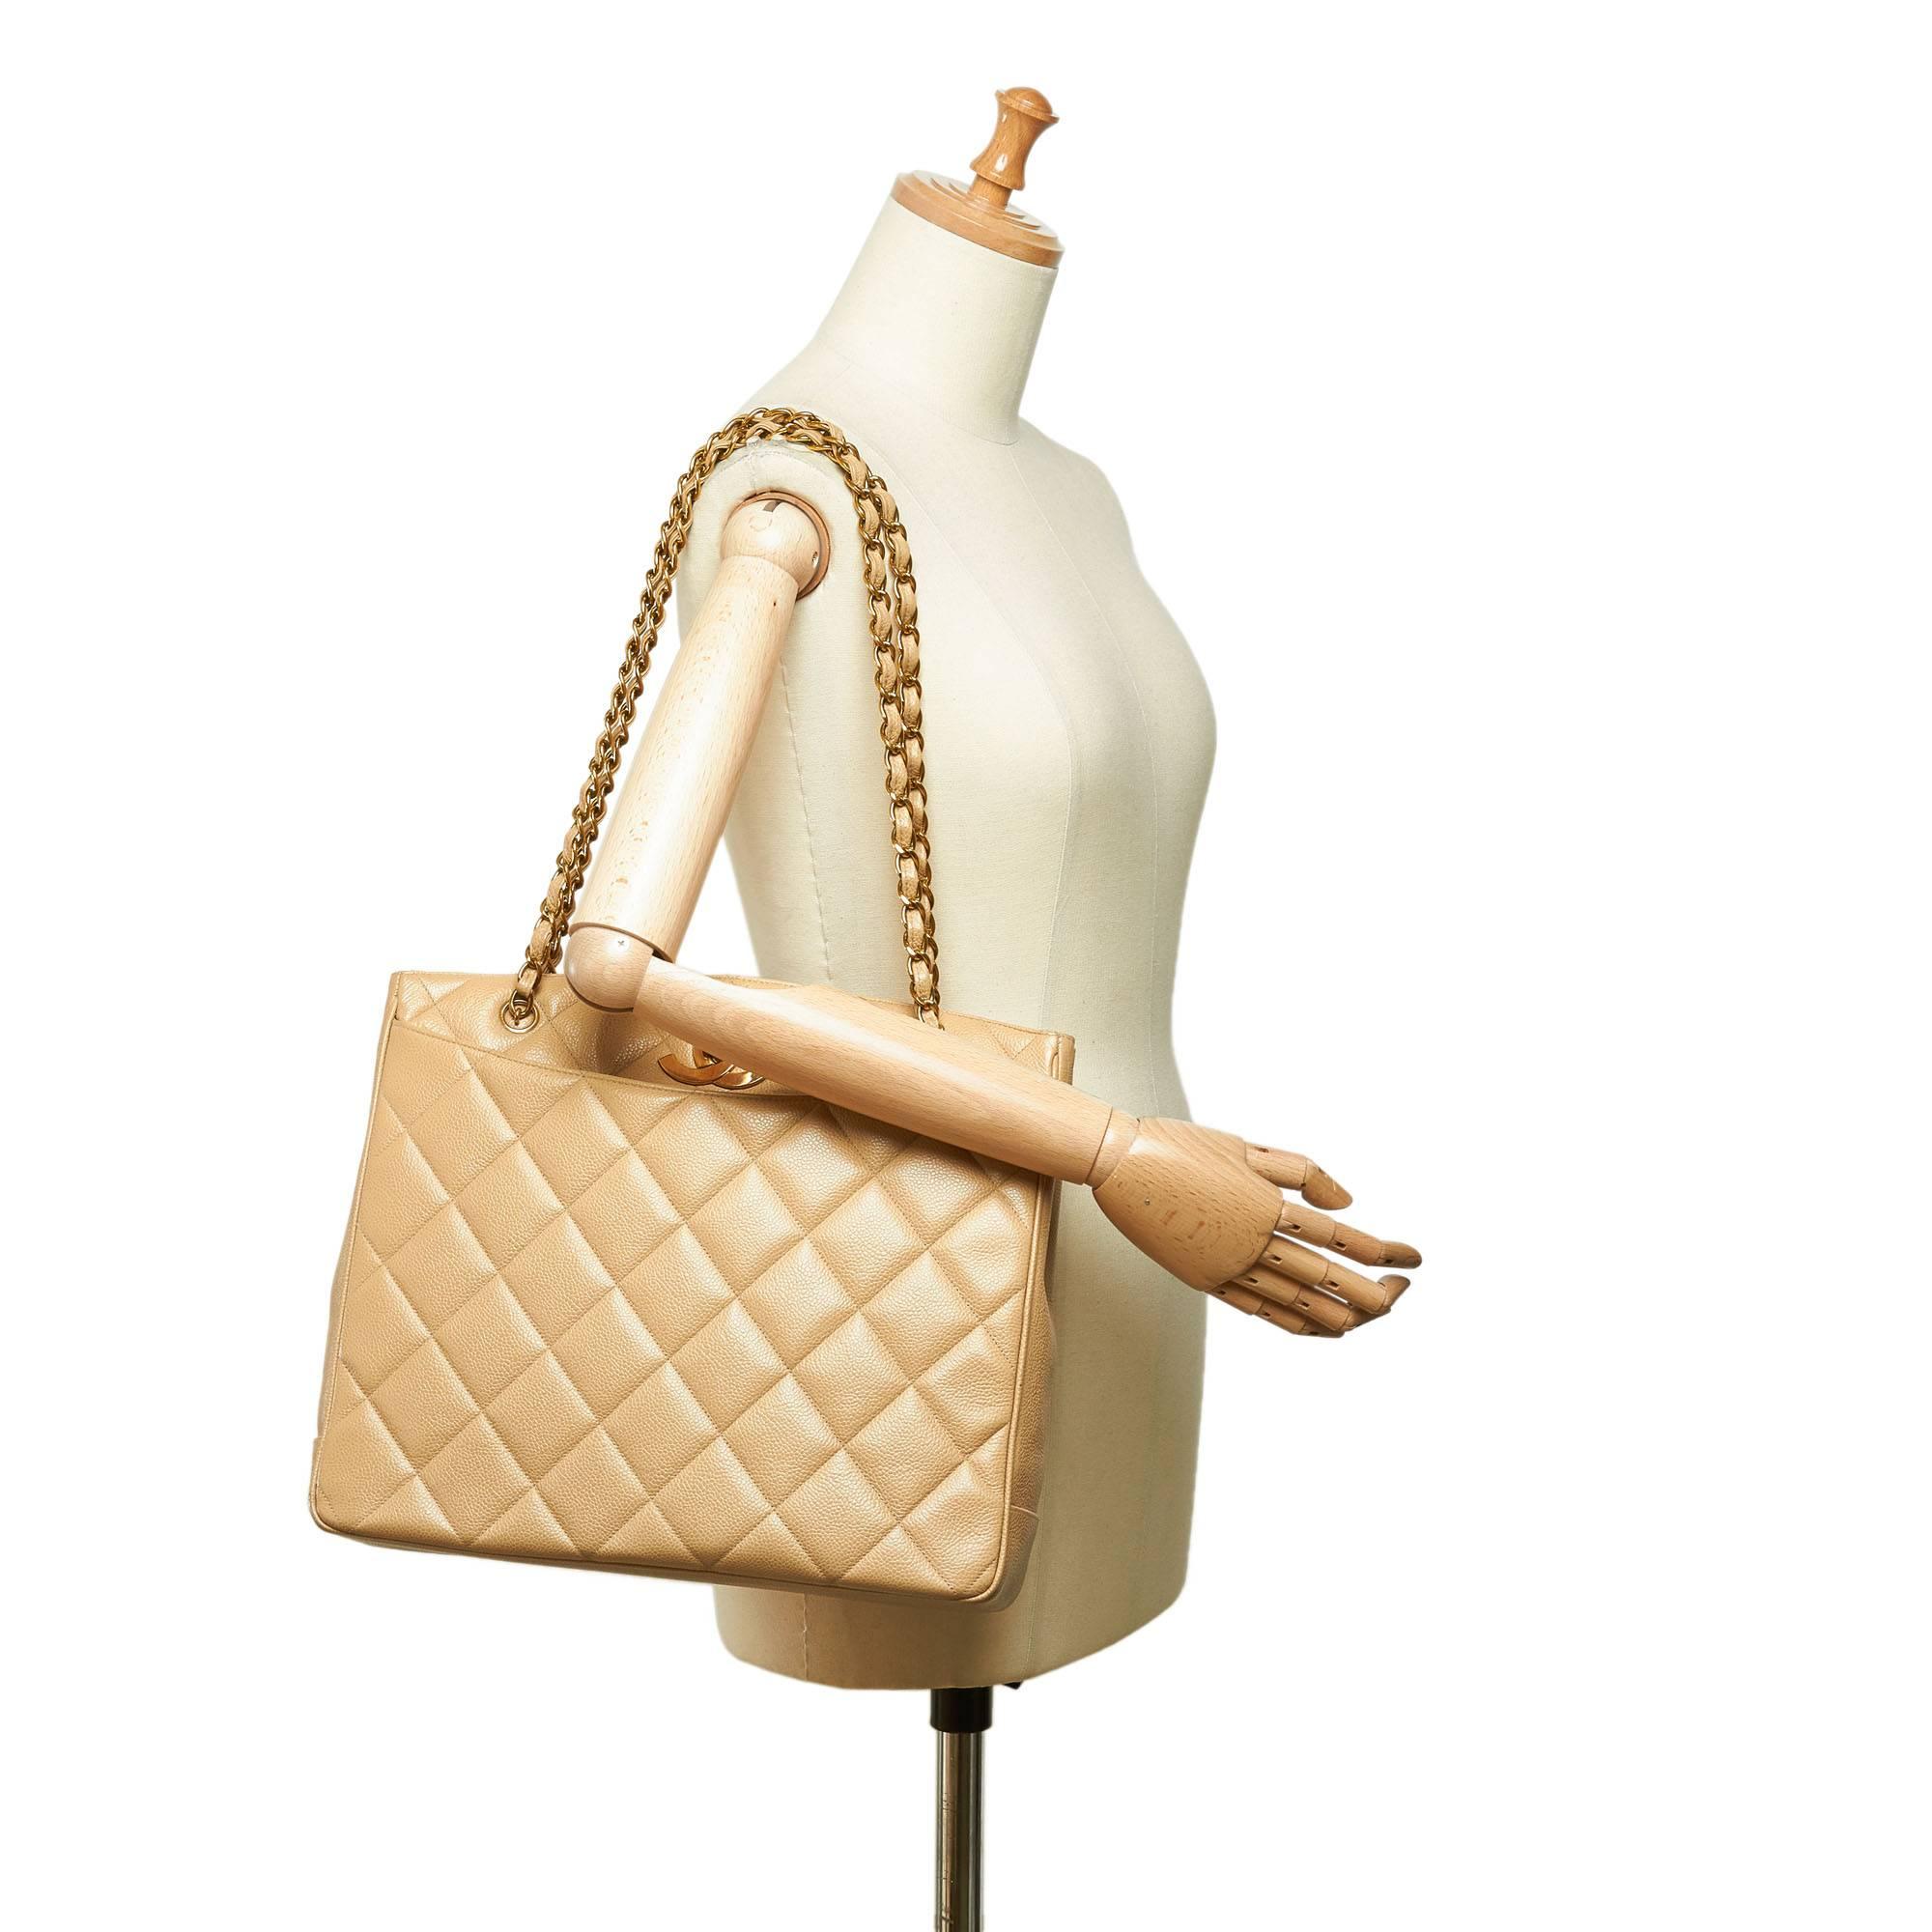 - Vintage 90s Chanel beige caviar leather shoulder bag. 

- Featuring an exterior front and back open pocket, gold-tone chains, gold-toned 